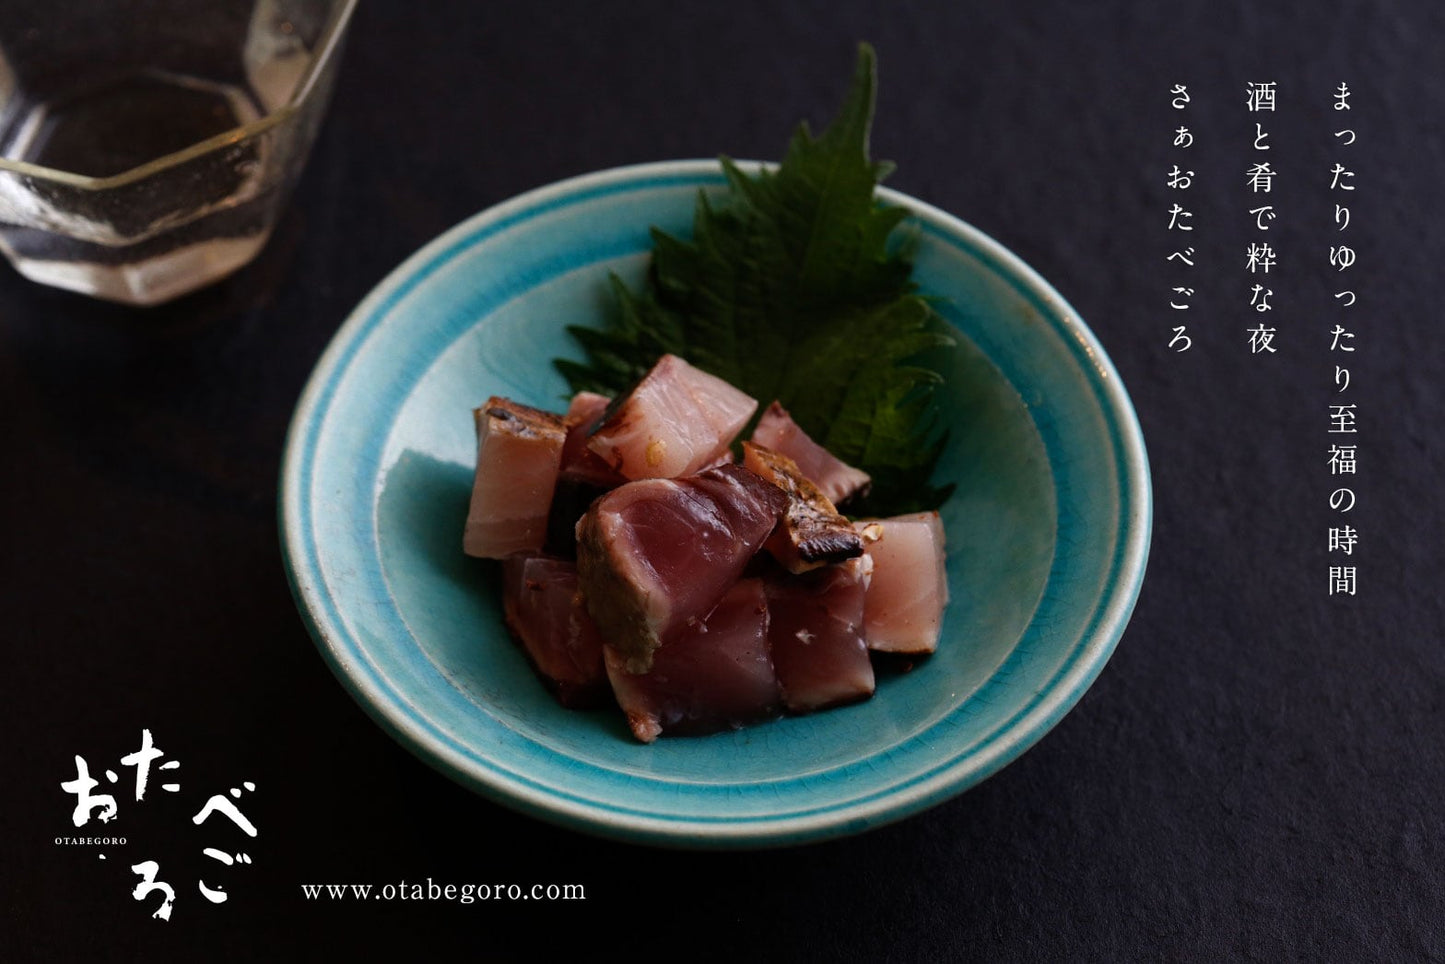 [One trial] Subscription "Cheers Zen" Subscription with raw unblended sake and Tosa's "Otabegoro" products as a set